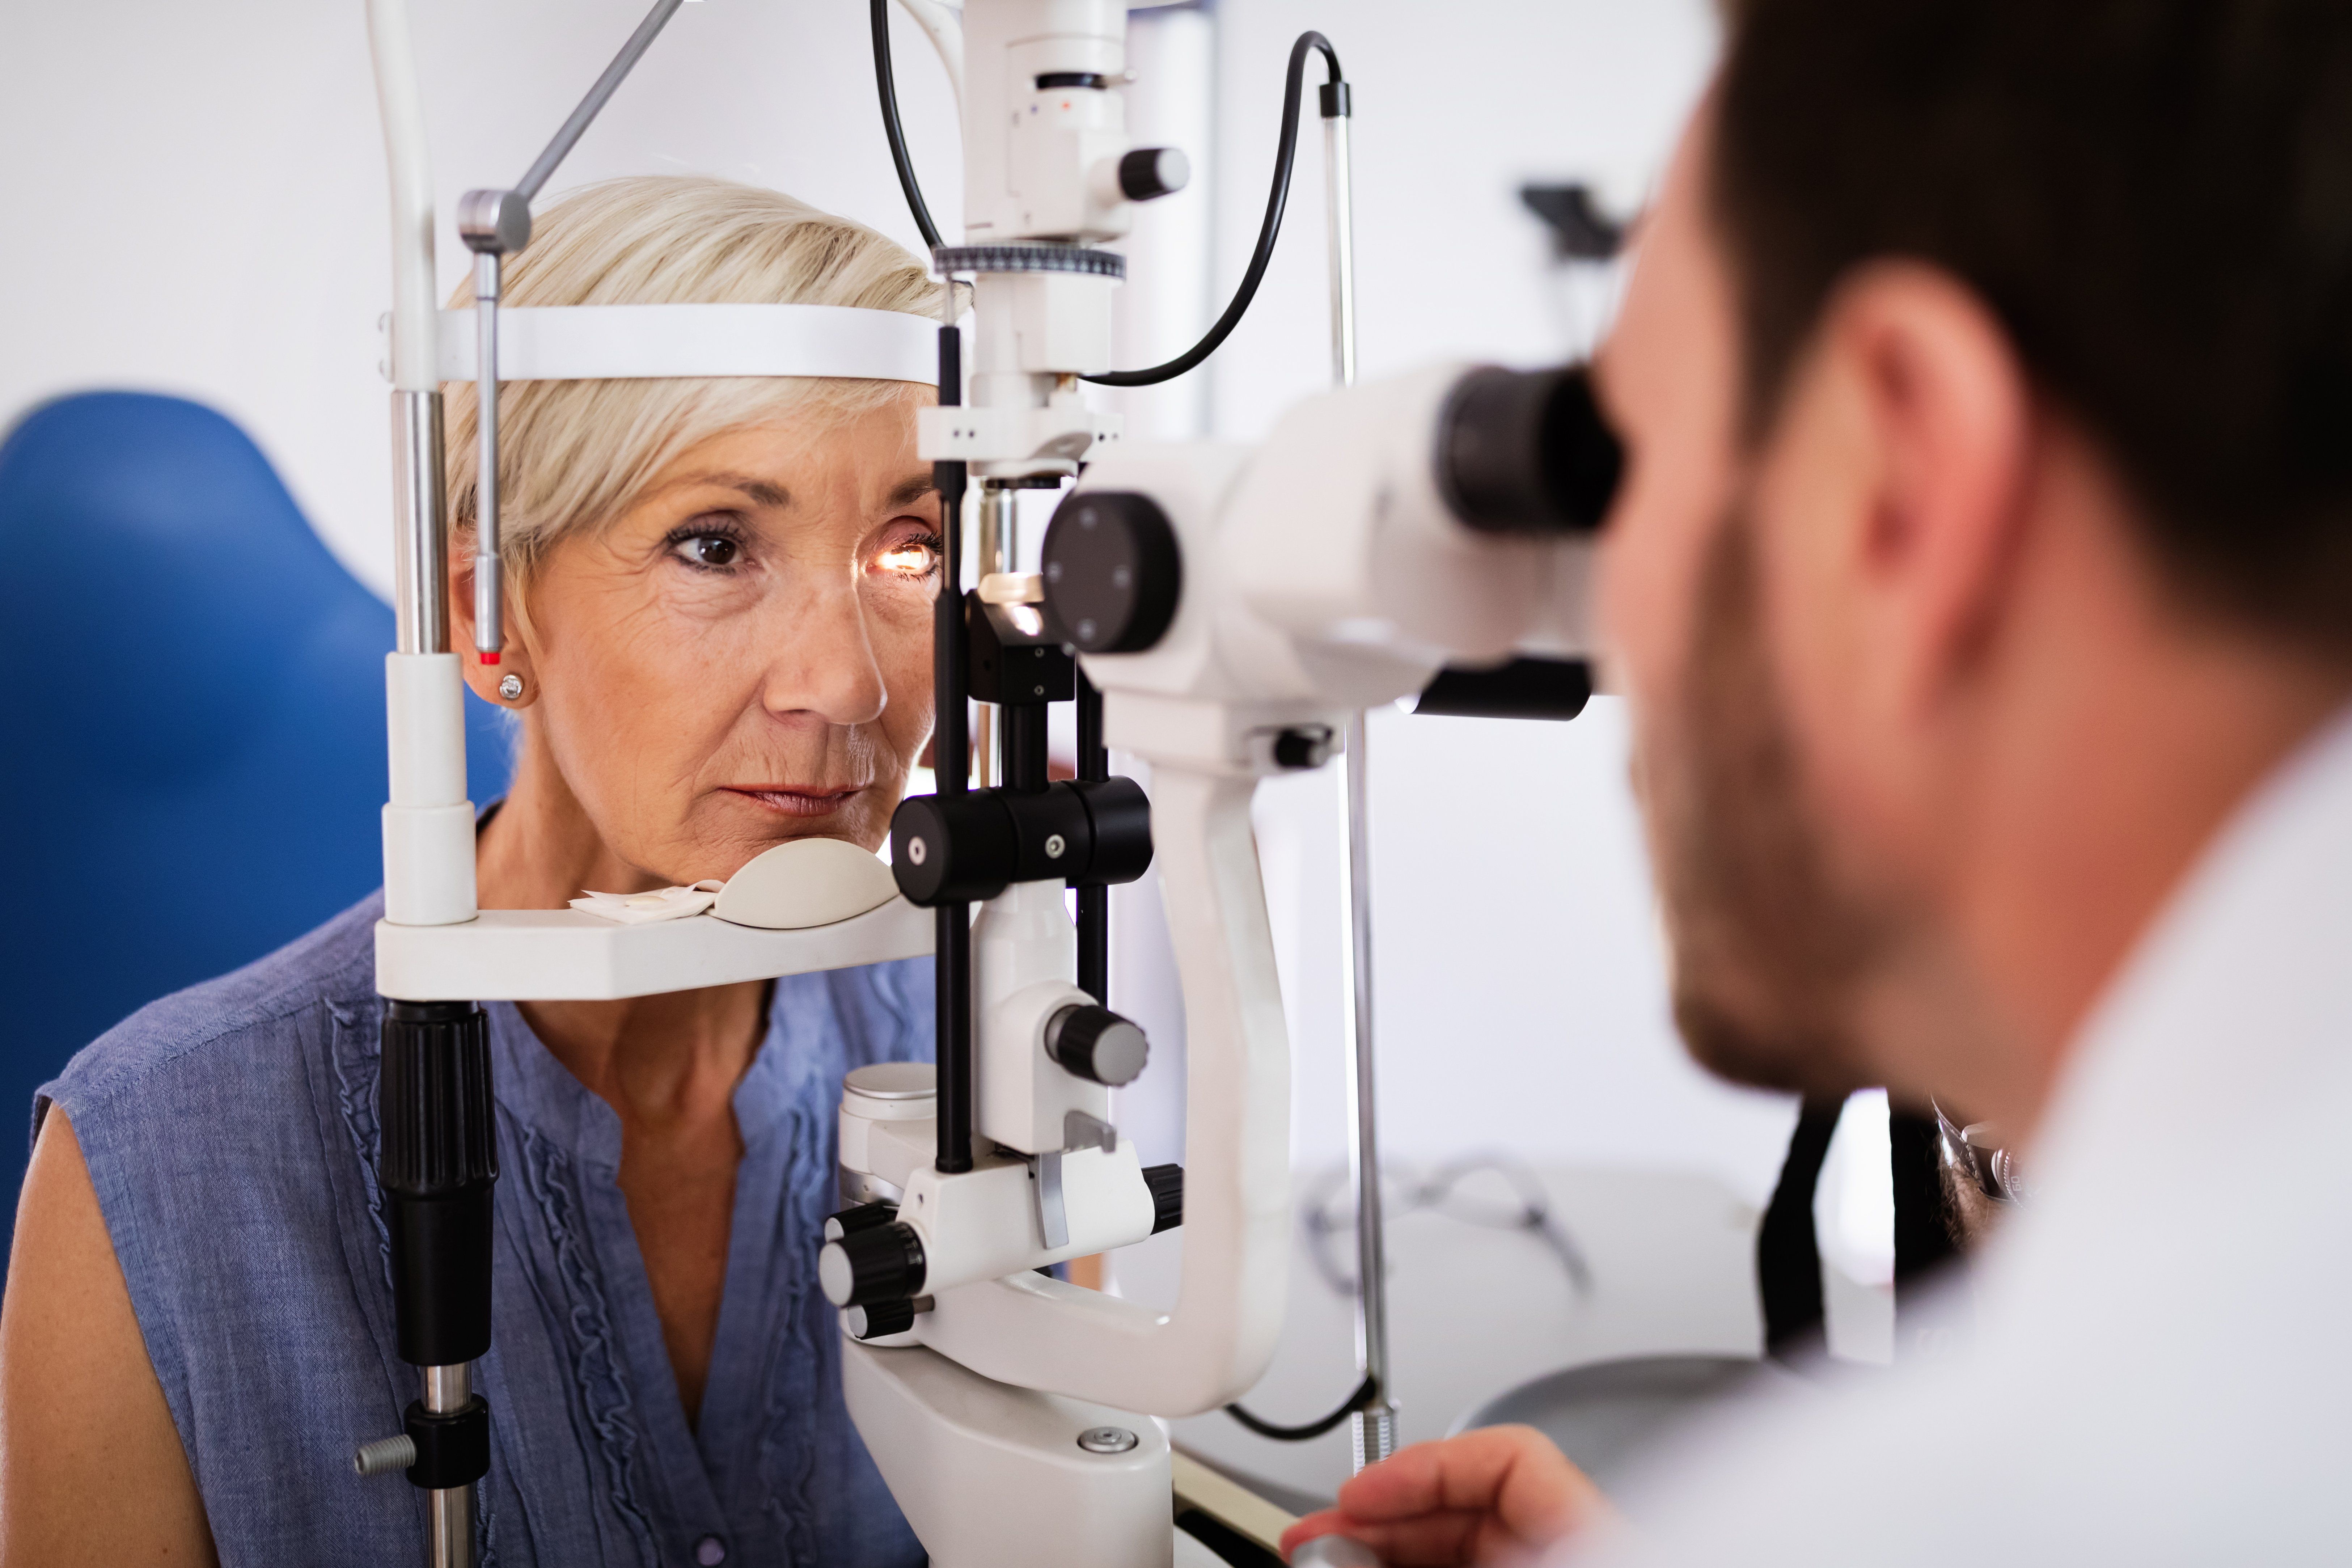 Contact Lens Exam: Everything You Need to Know